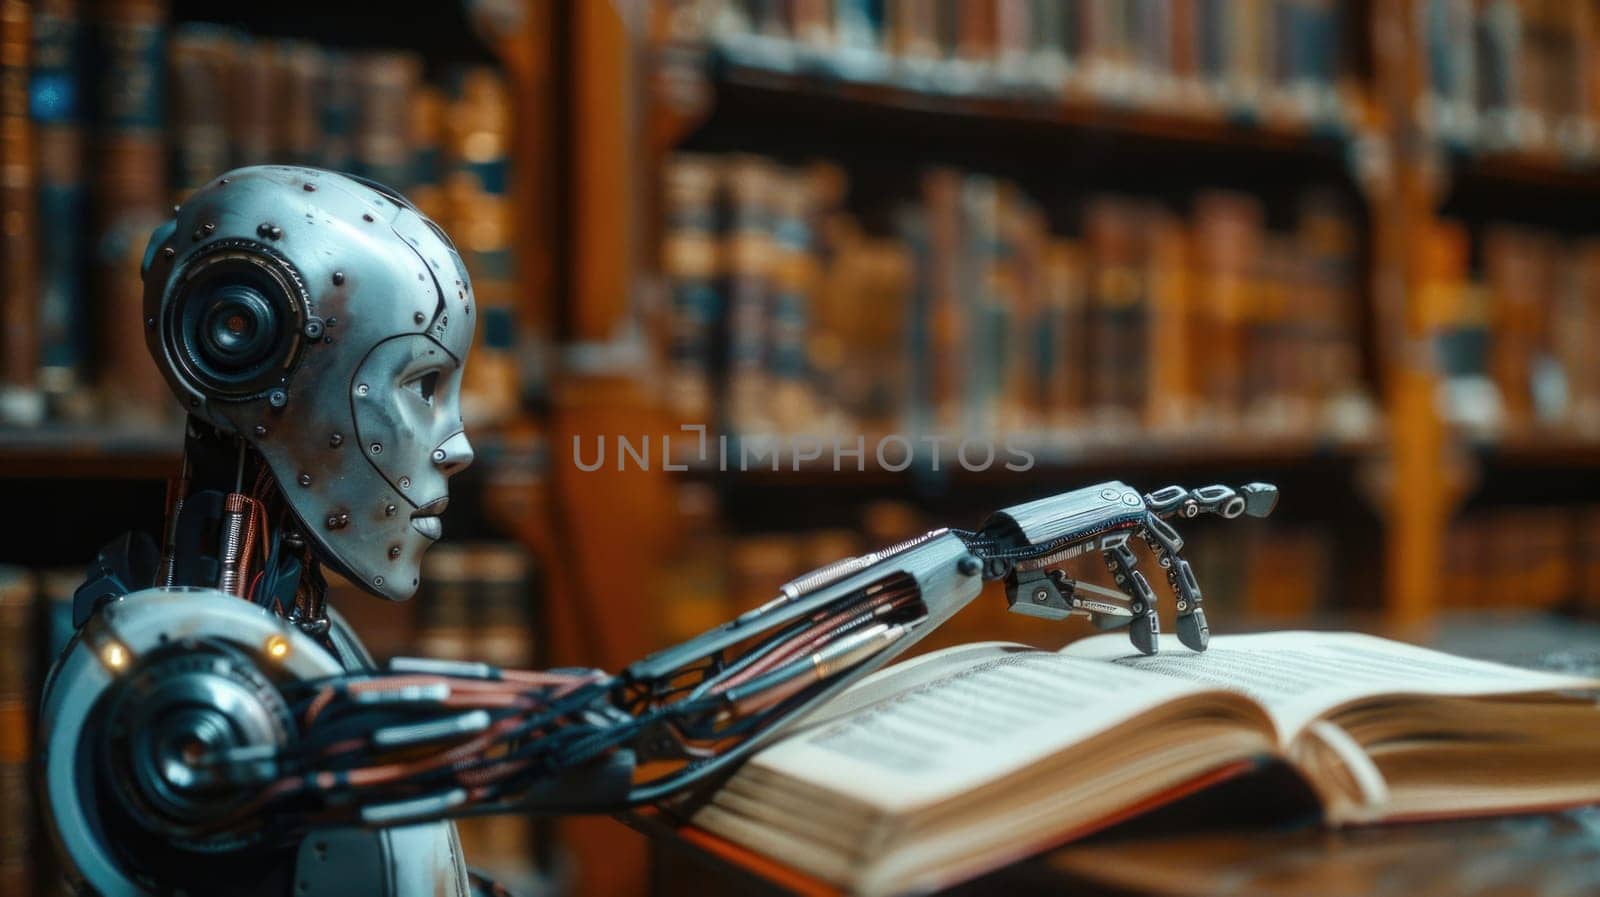 Robot Reading Book in Library by but_photo